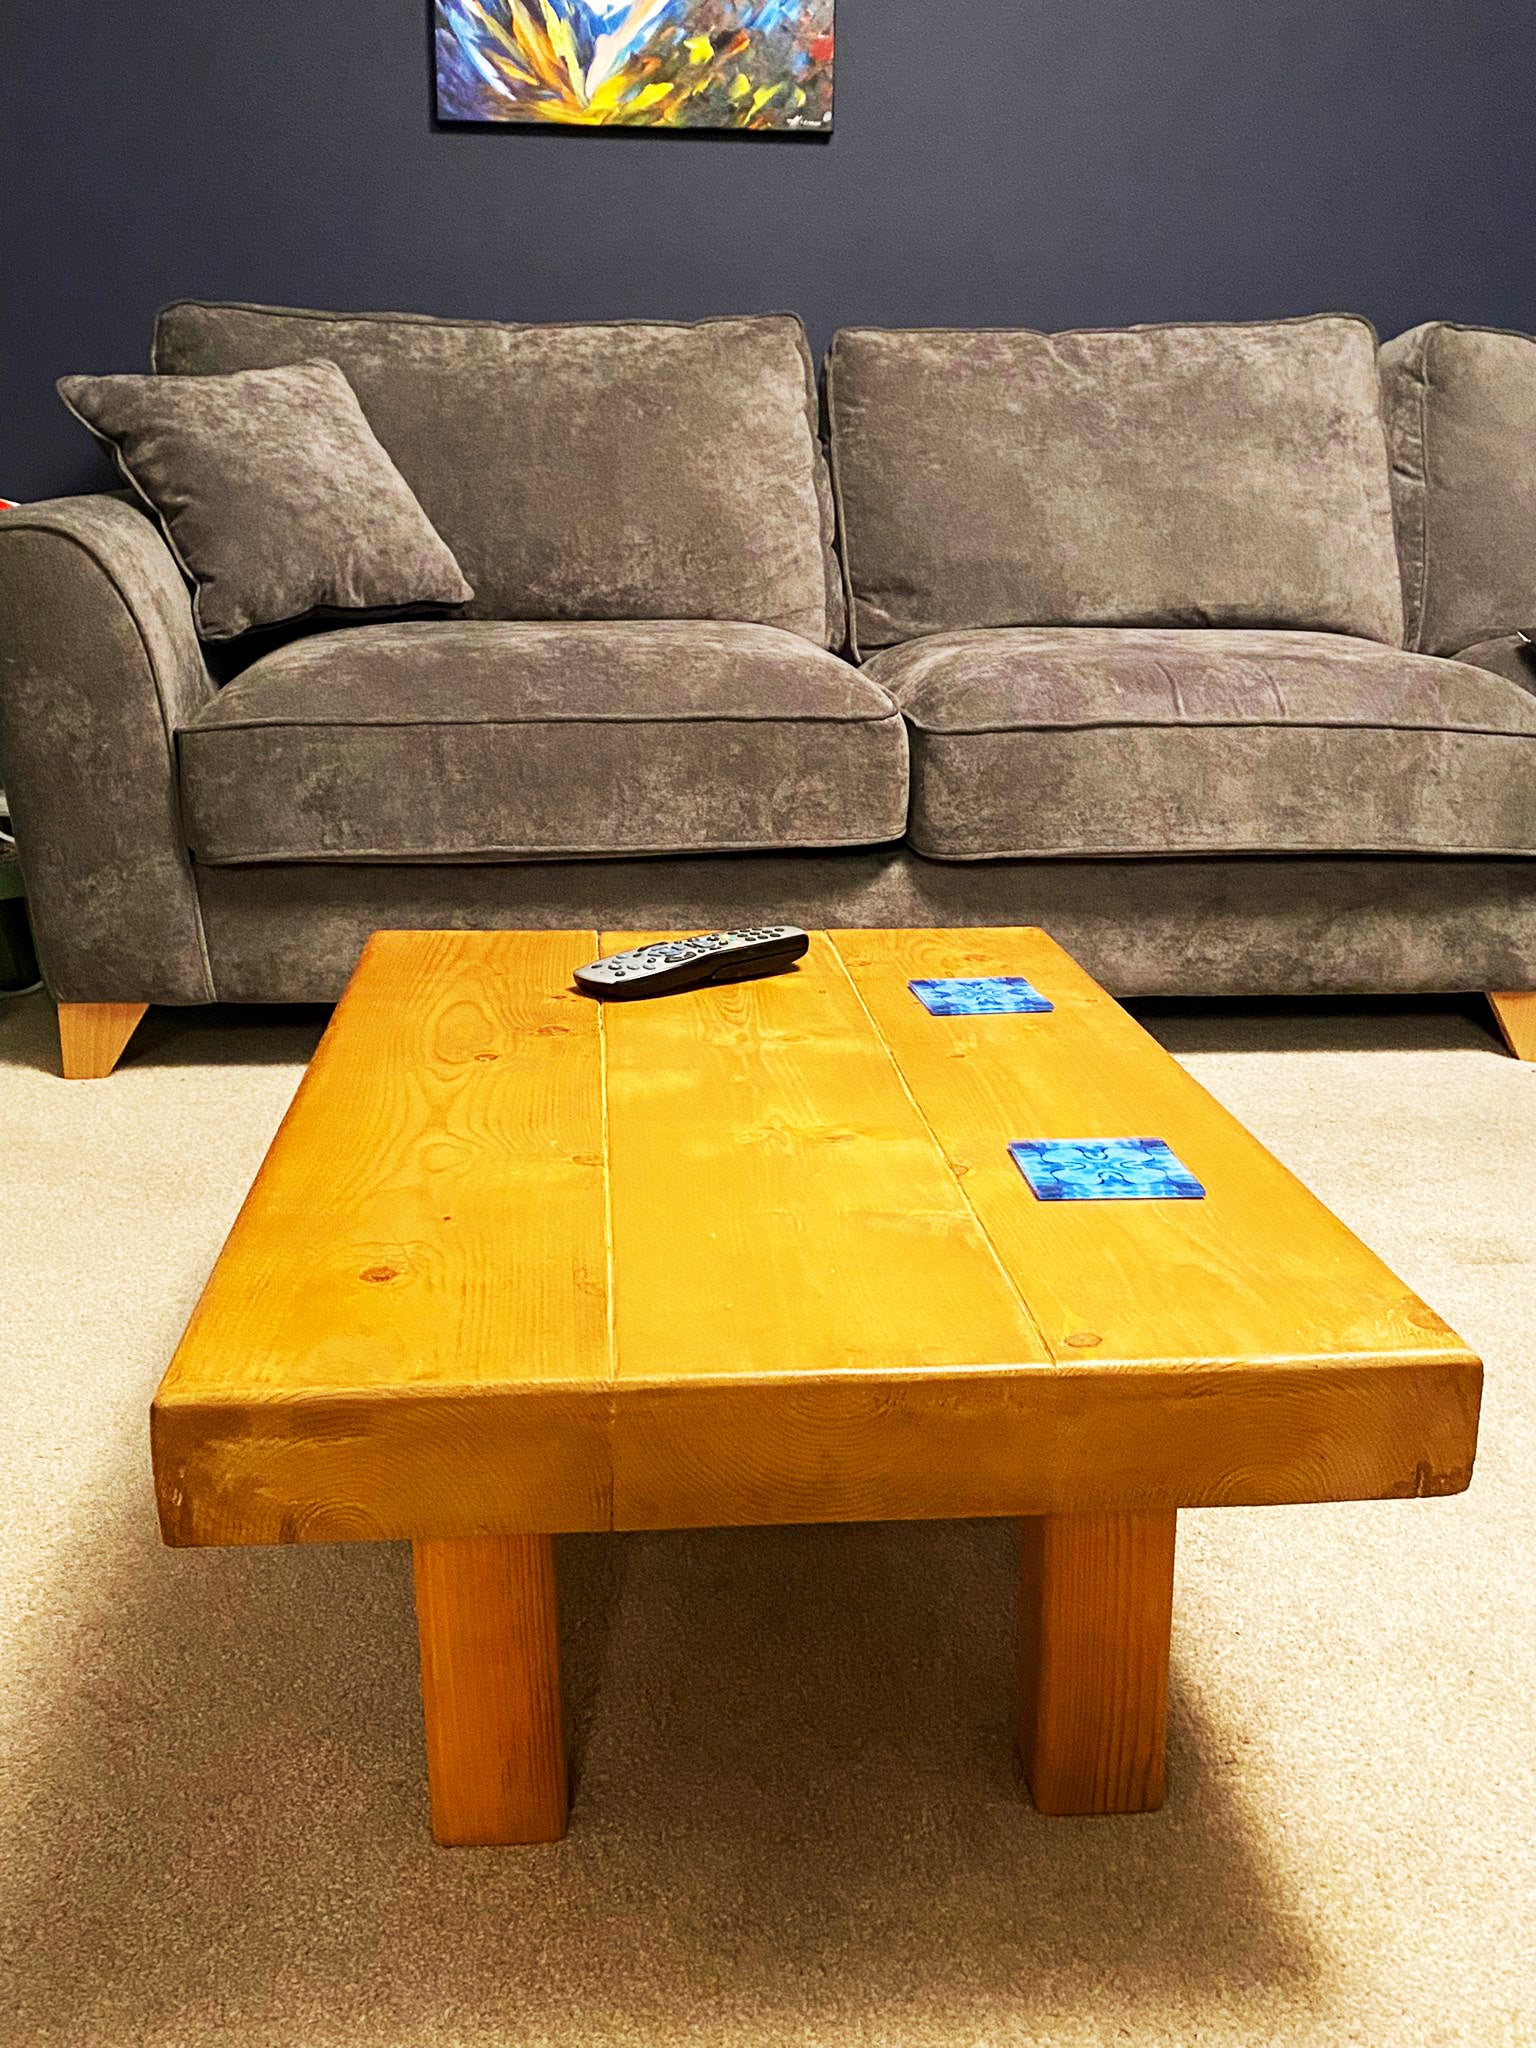 Said woods coffee table, couch table farmhouse style